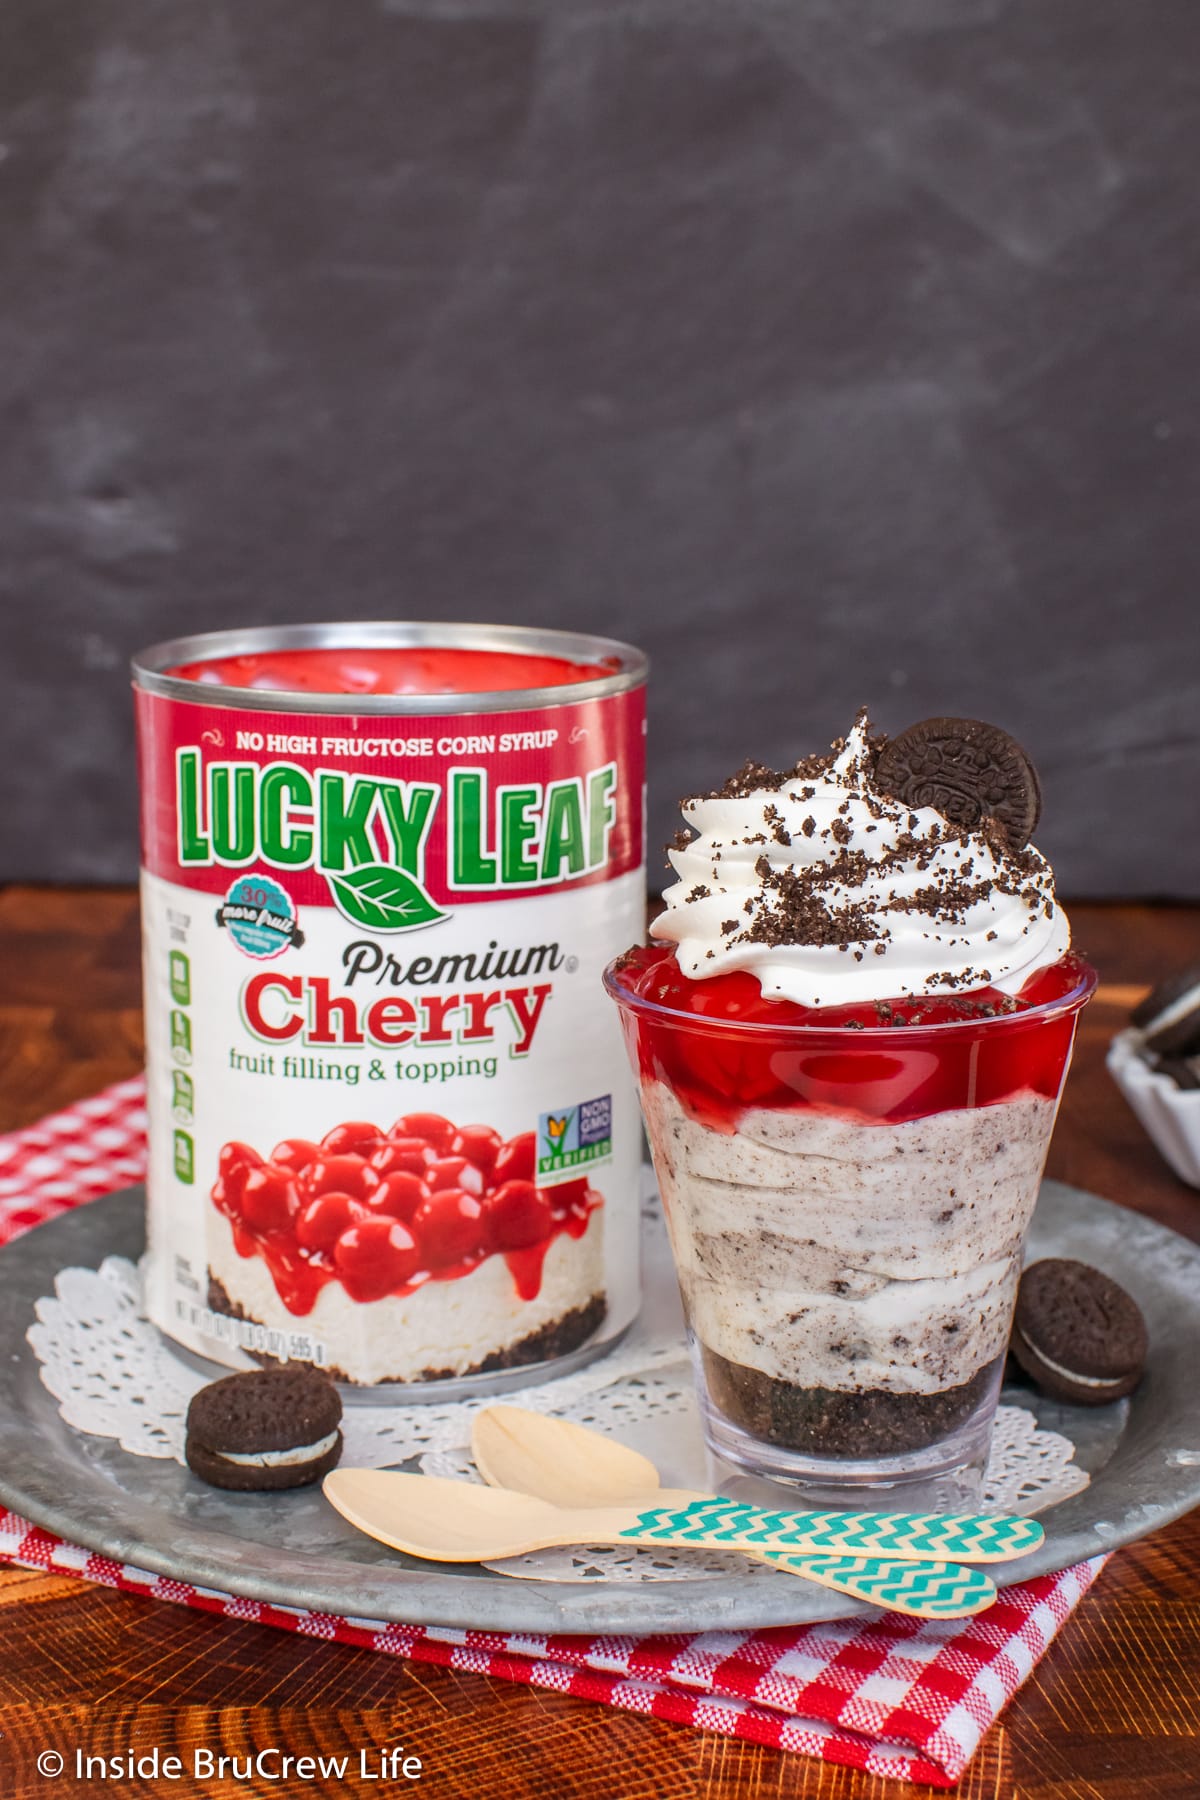 A cheesecake parfait sitting beside a can of pie filling.